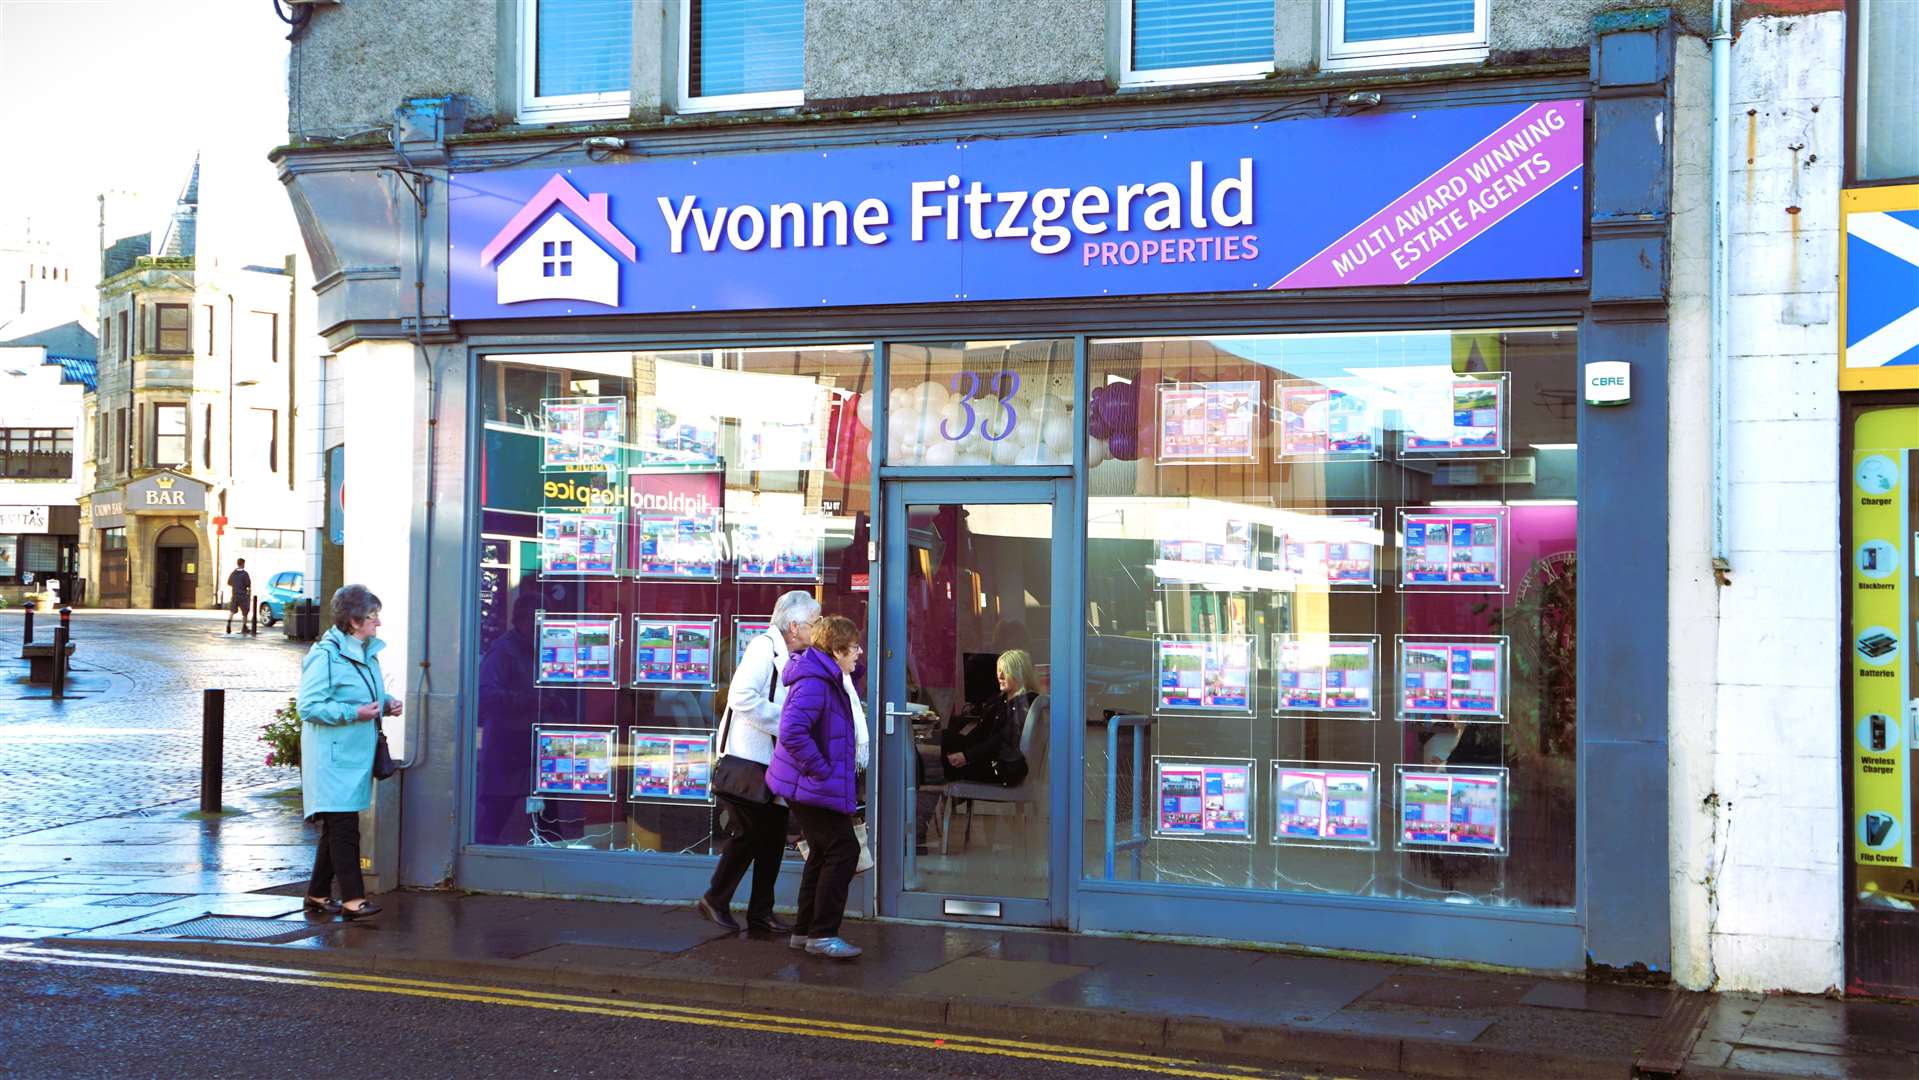 Yvonne Fitzgerald Properties opened an office in Wick last year. Picture: DGS